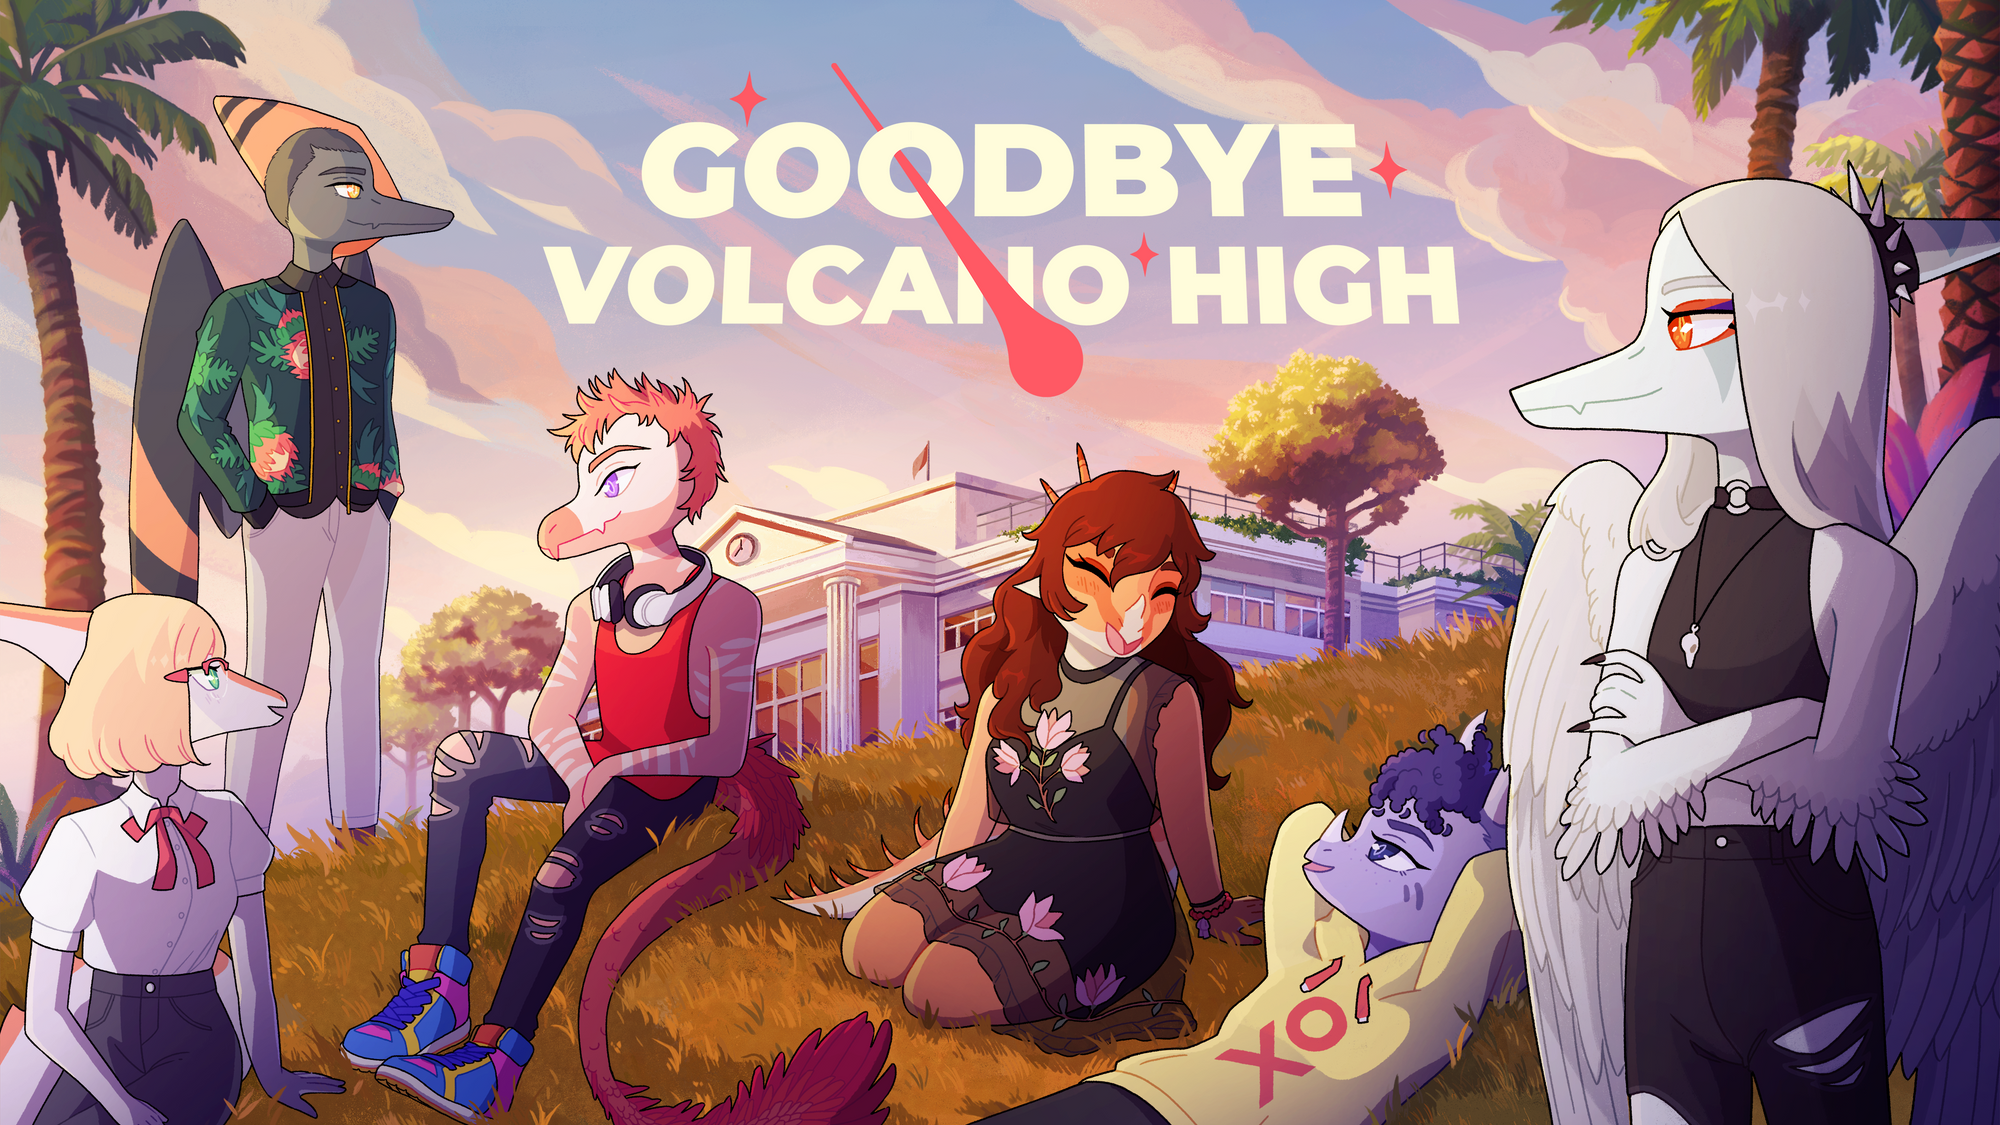 "Goodbye Volcano High" is now available on PC & Playstation.